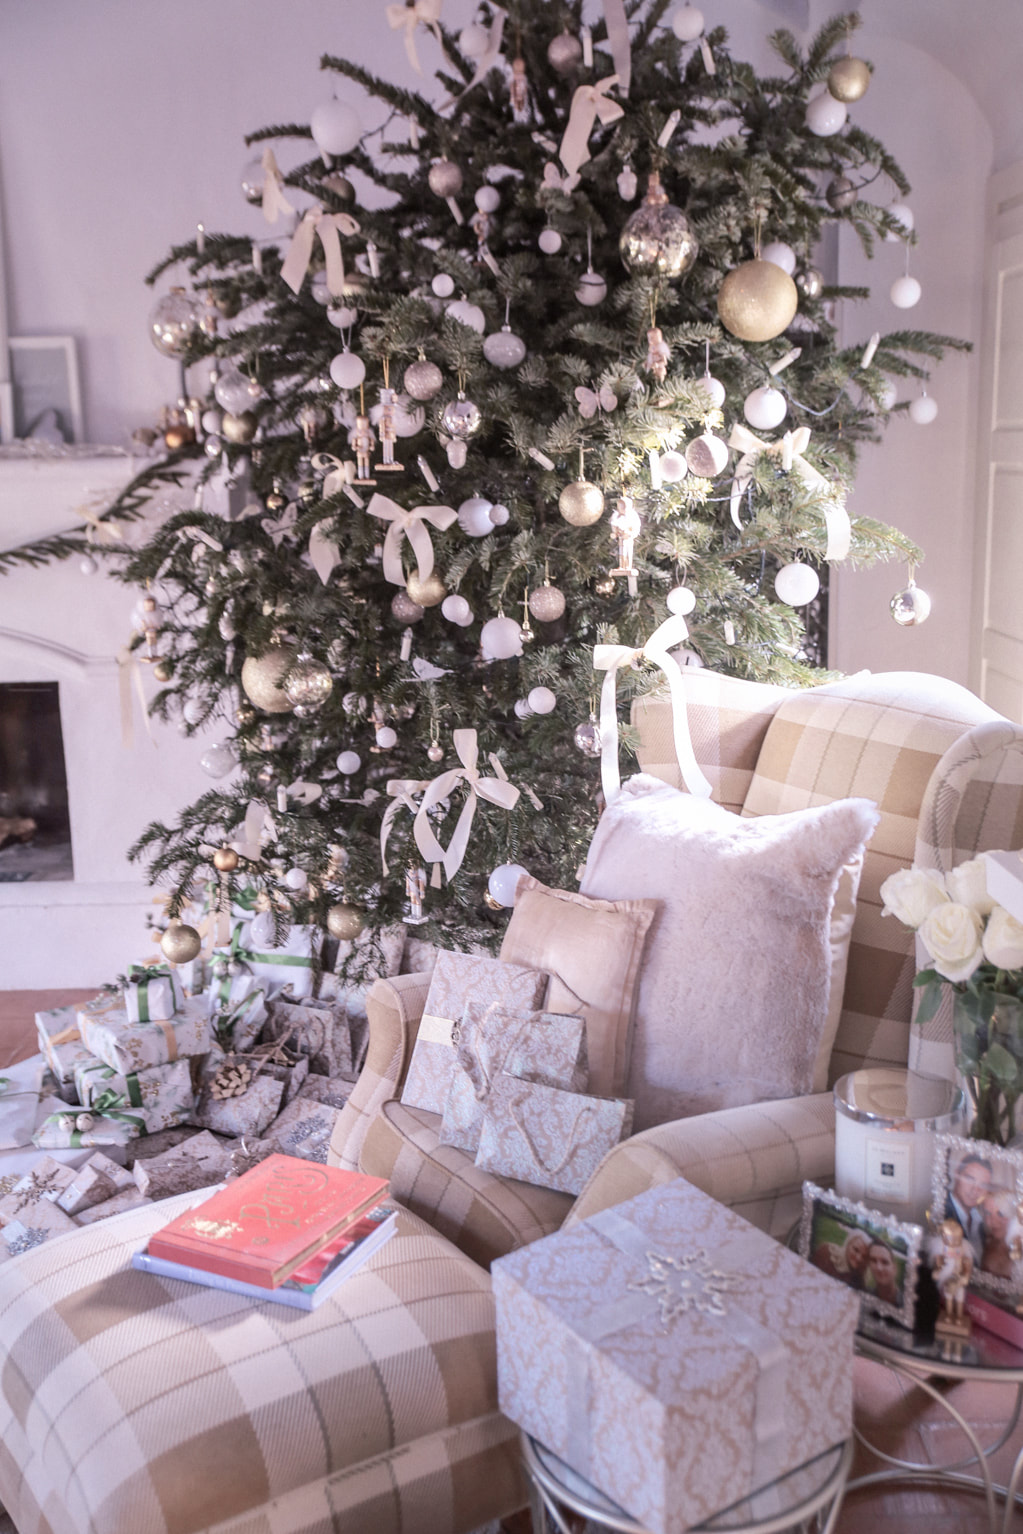 How I decorate for Christmas Part 3 By The Belle Blog